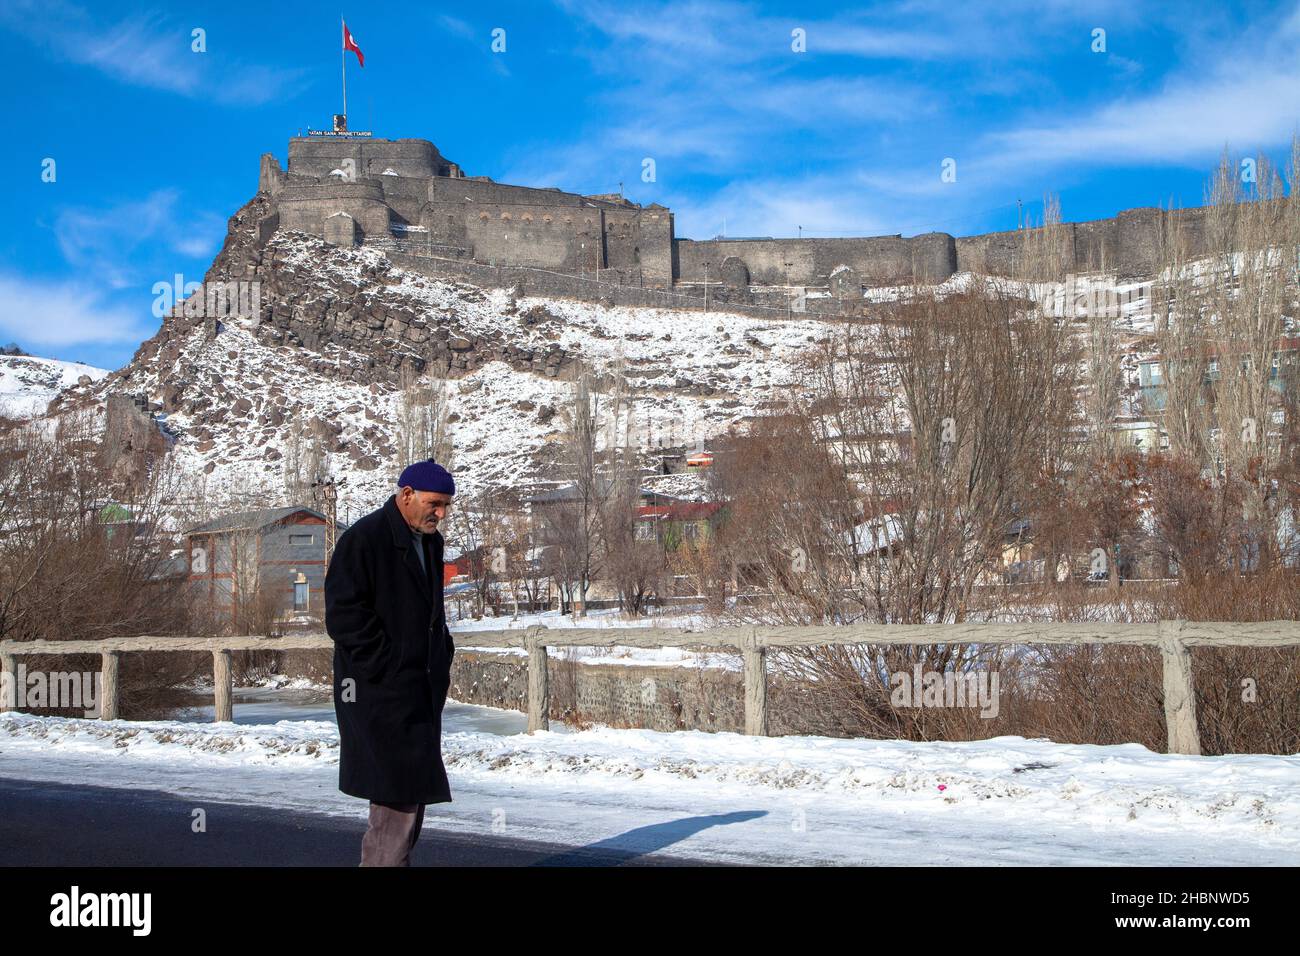 Kars,Turkey - 01-26-2016:View of the historical Kars castle, a snowy day Stock Photo